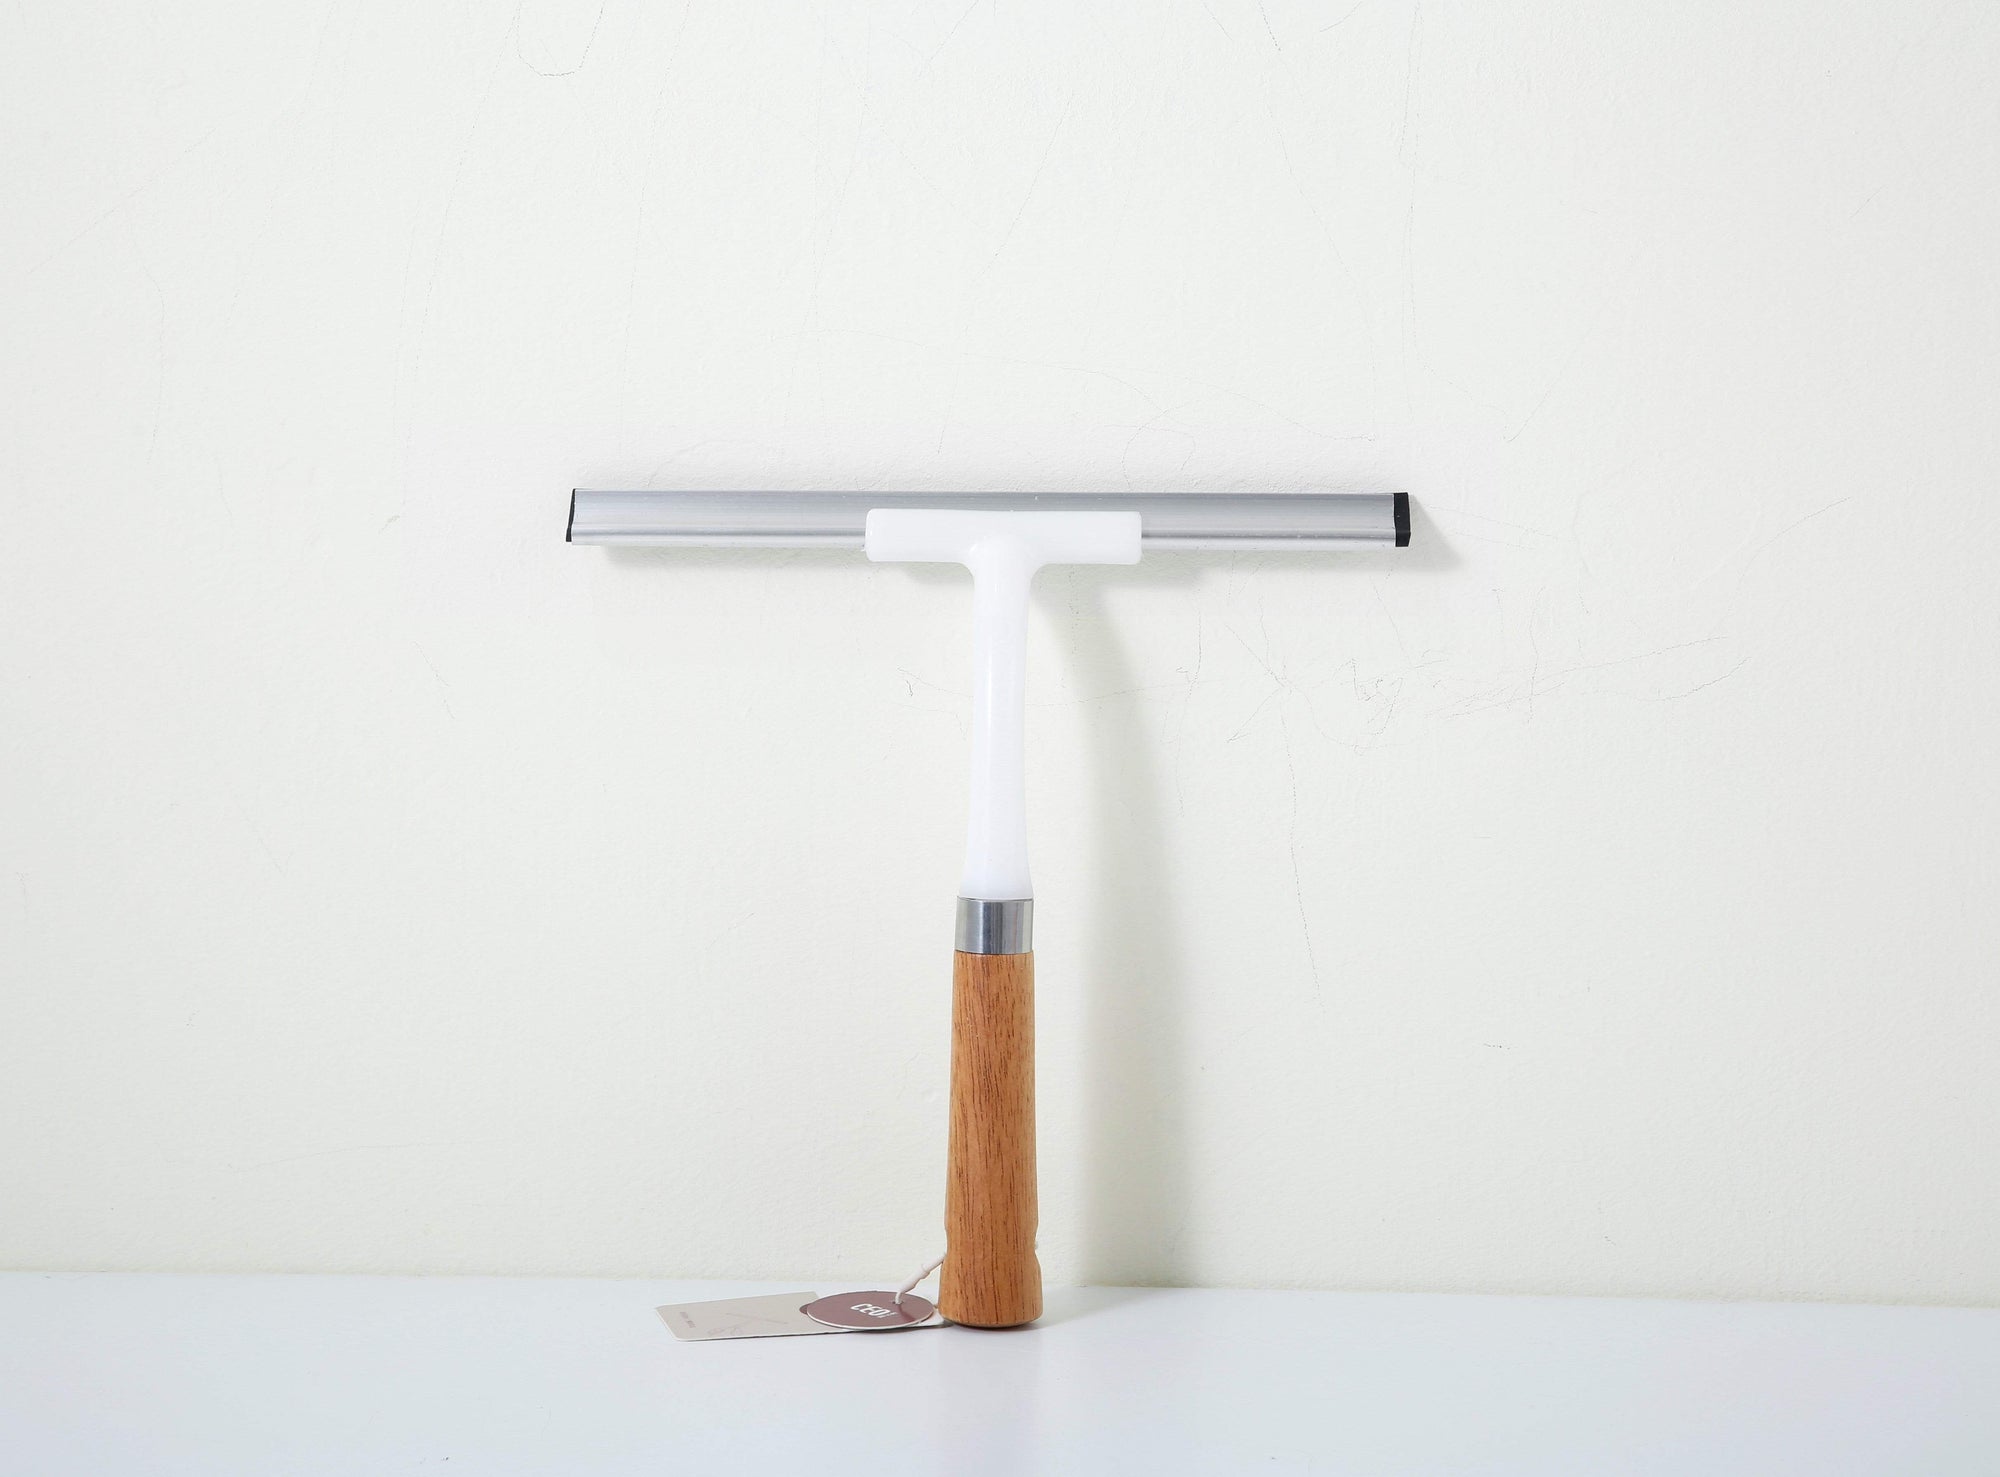 Glass squeegee